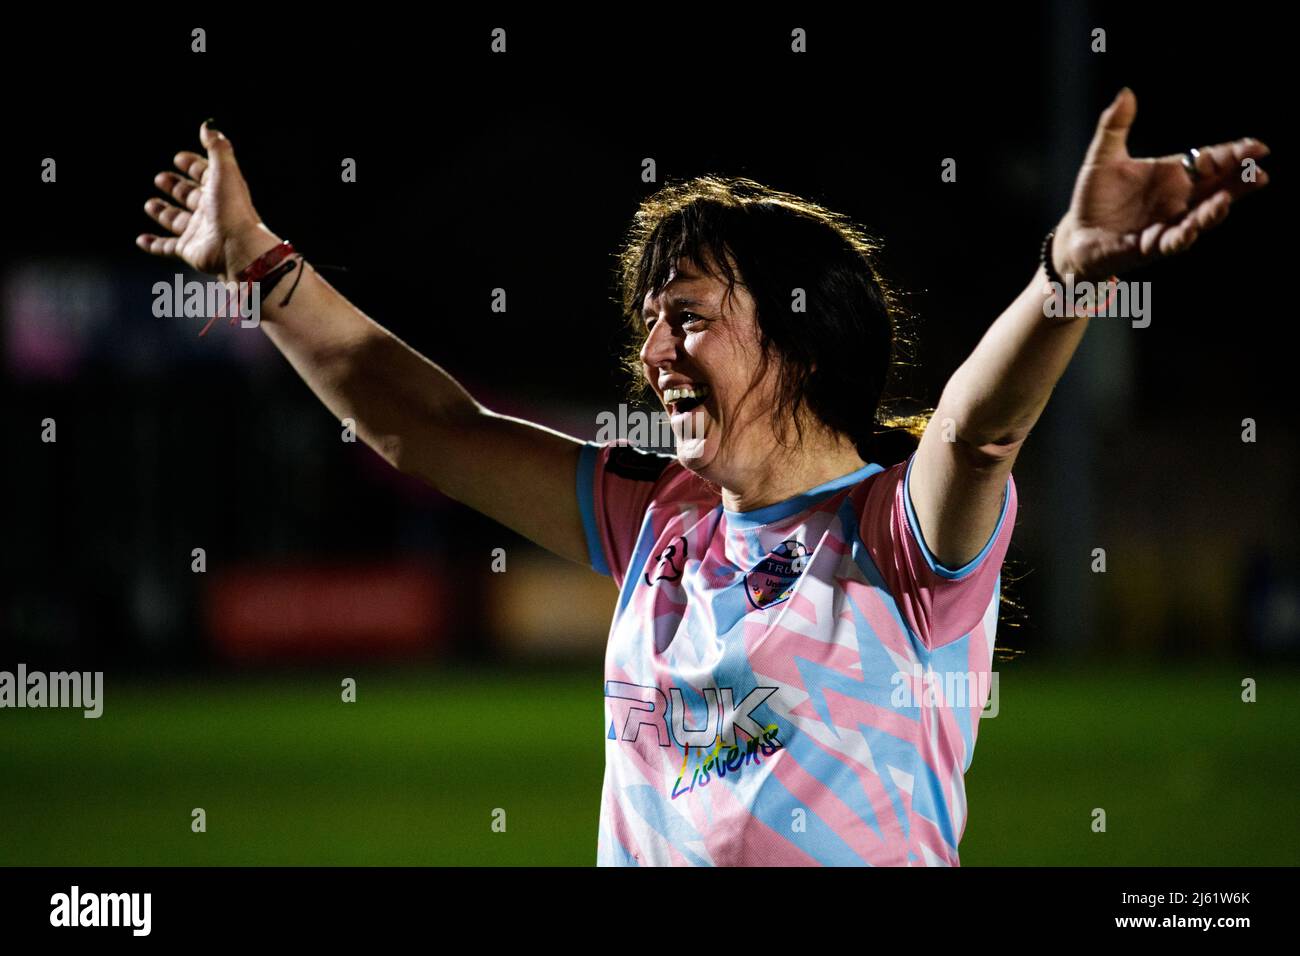 TRUK player Paula Griffin at the Football vs Transphobia challenge match between Dulwich Hamlet and Trans Radio UK at Champion Hill in London, England Stock Photo